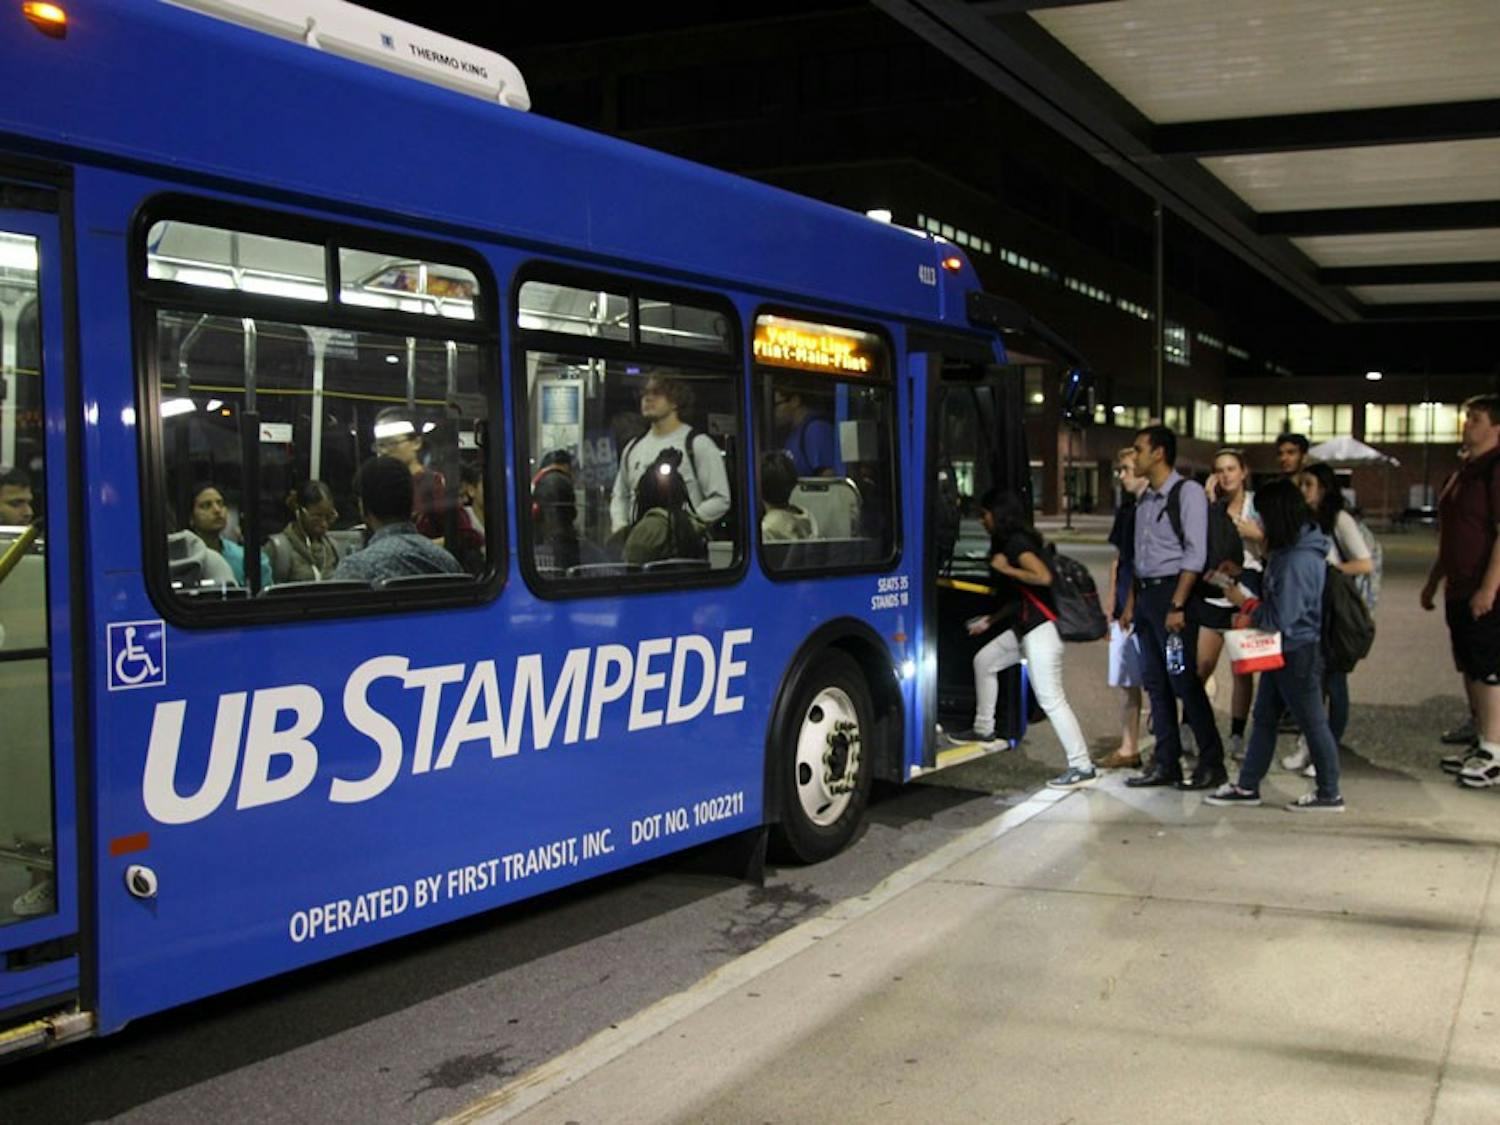 In a statement released August 9, UB Transportation announced that the late night bus, better known as the “drunk bus” will no longer run and the latest bus will now be at 2 a.m.